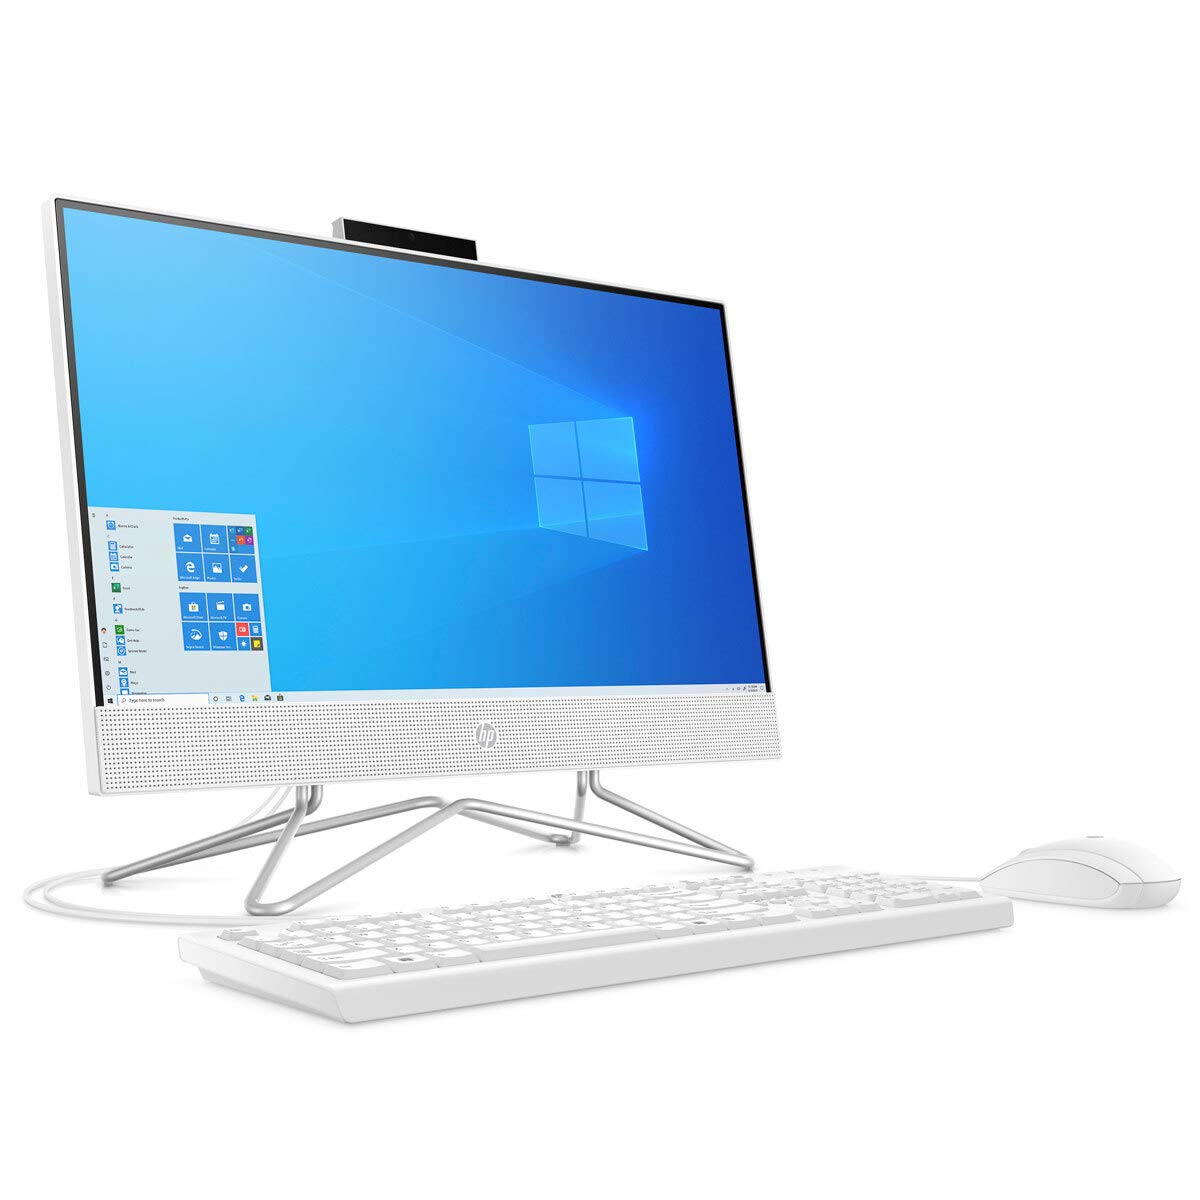 HP All in One 23.8 inch FHD Display Desktop PC 24-df0026na, Intel i5-10400T, 256GB SSD, 8GB RAM, Intel® UHD Graphics 630, Windows 11 Home, USB wired keyboard and mouse, White